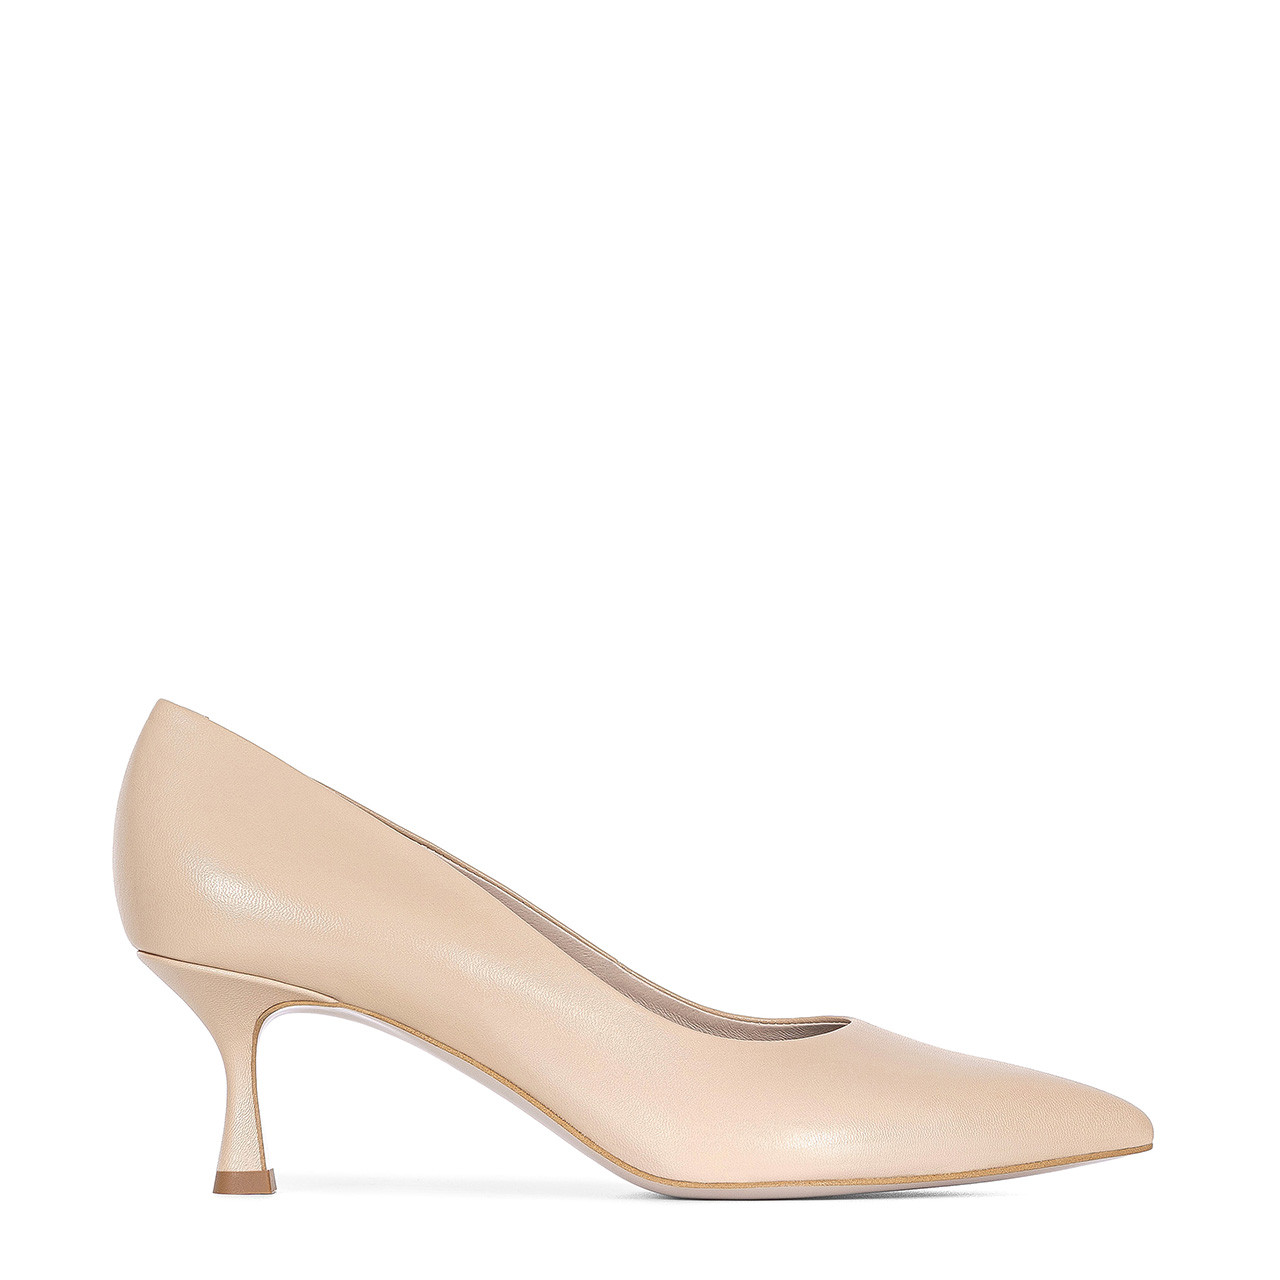 New Look Tan Faux Suede Low Block Heel Shoes - Kate Middleton Shoes -  Kate's Closet